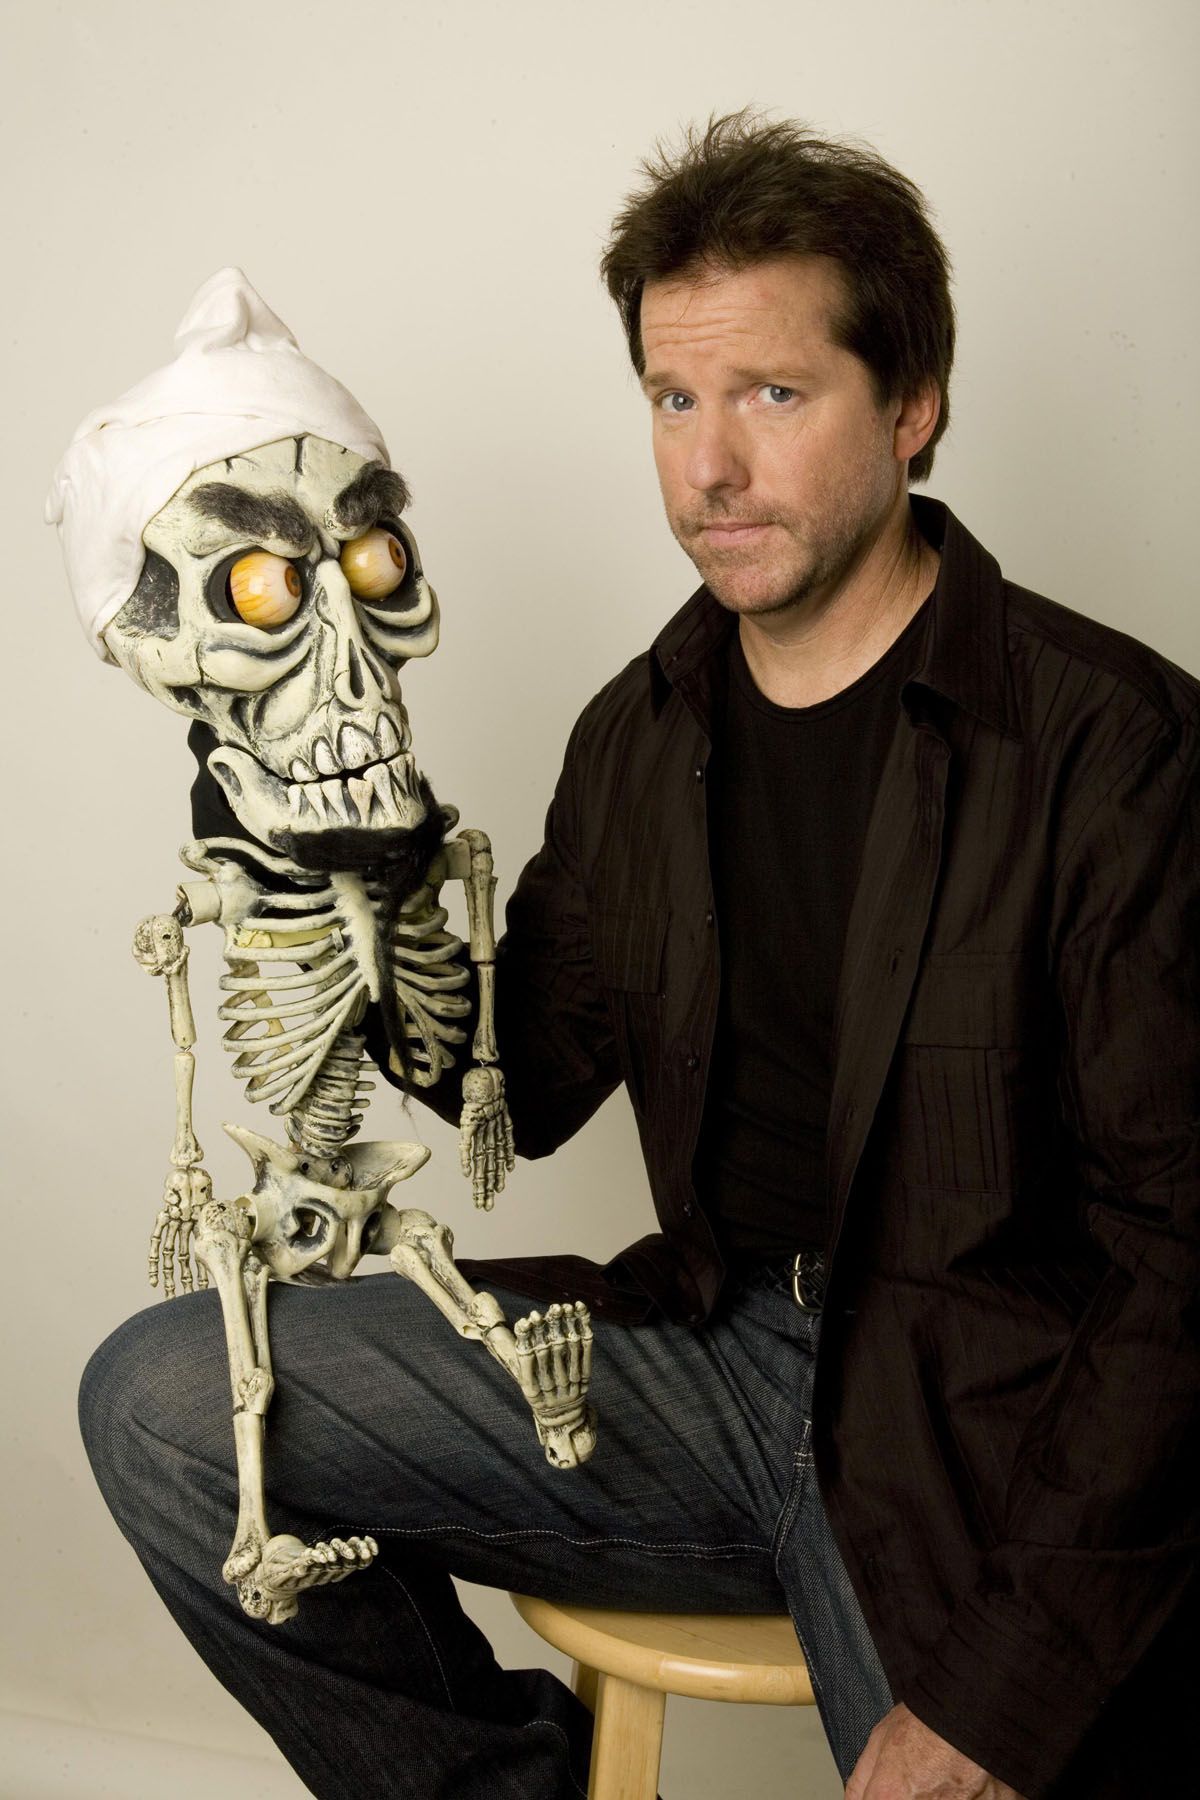 Comedian and ventriloquist Jeff Dunham will perform Feb. 17 at the Spokane Arena. Wilkinson Brown PR (Wilkinson Brown PR / The Spokesman-Review)